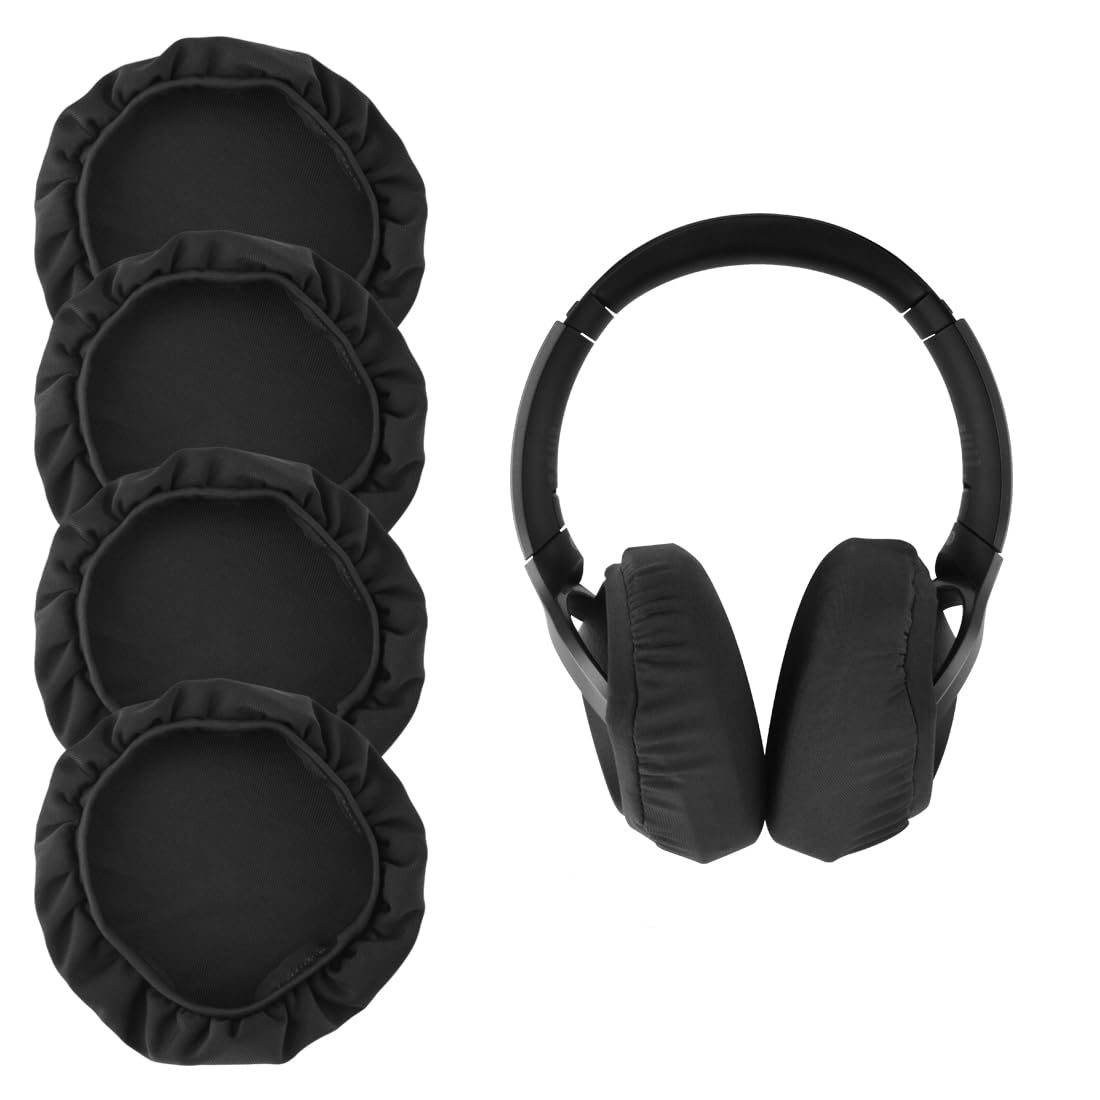 Linkidea Fabric Headphones Ear Cover, Washable Sanitary Earpads Protectors for Gym, Gaming, 2 Pairs Cloth Sweat Cover for Headphones Ear Cups (M, Black)